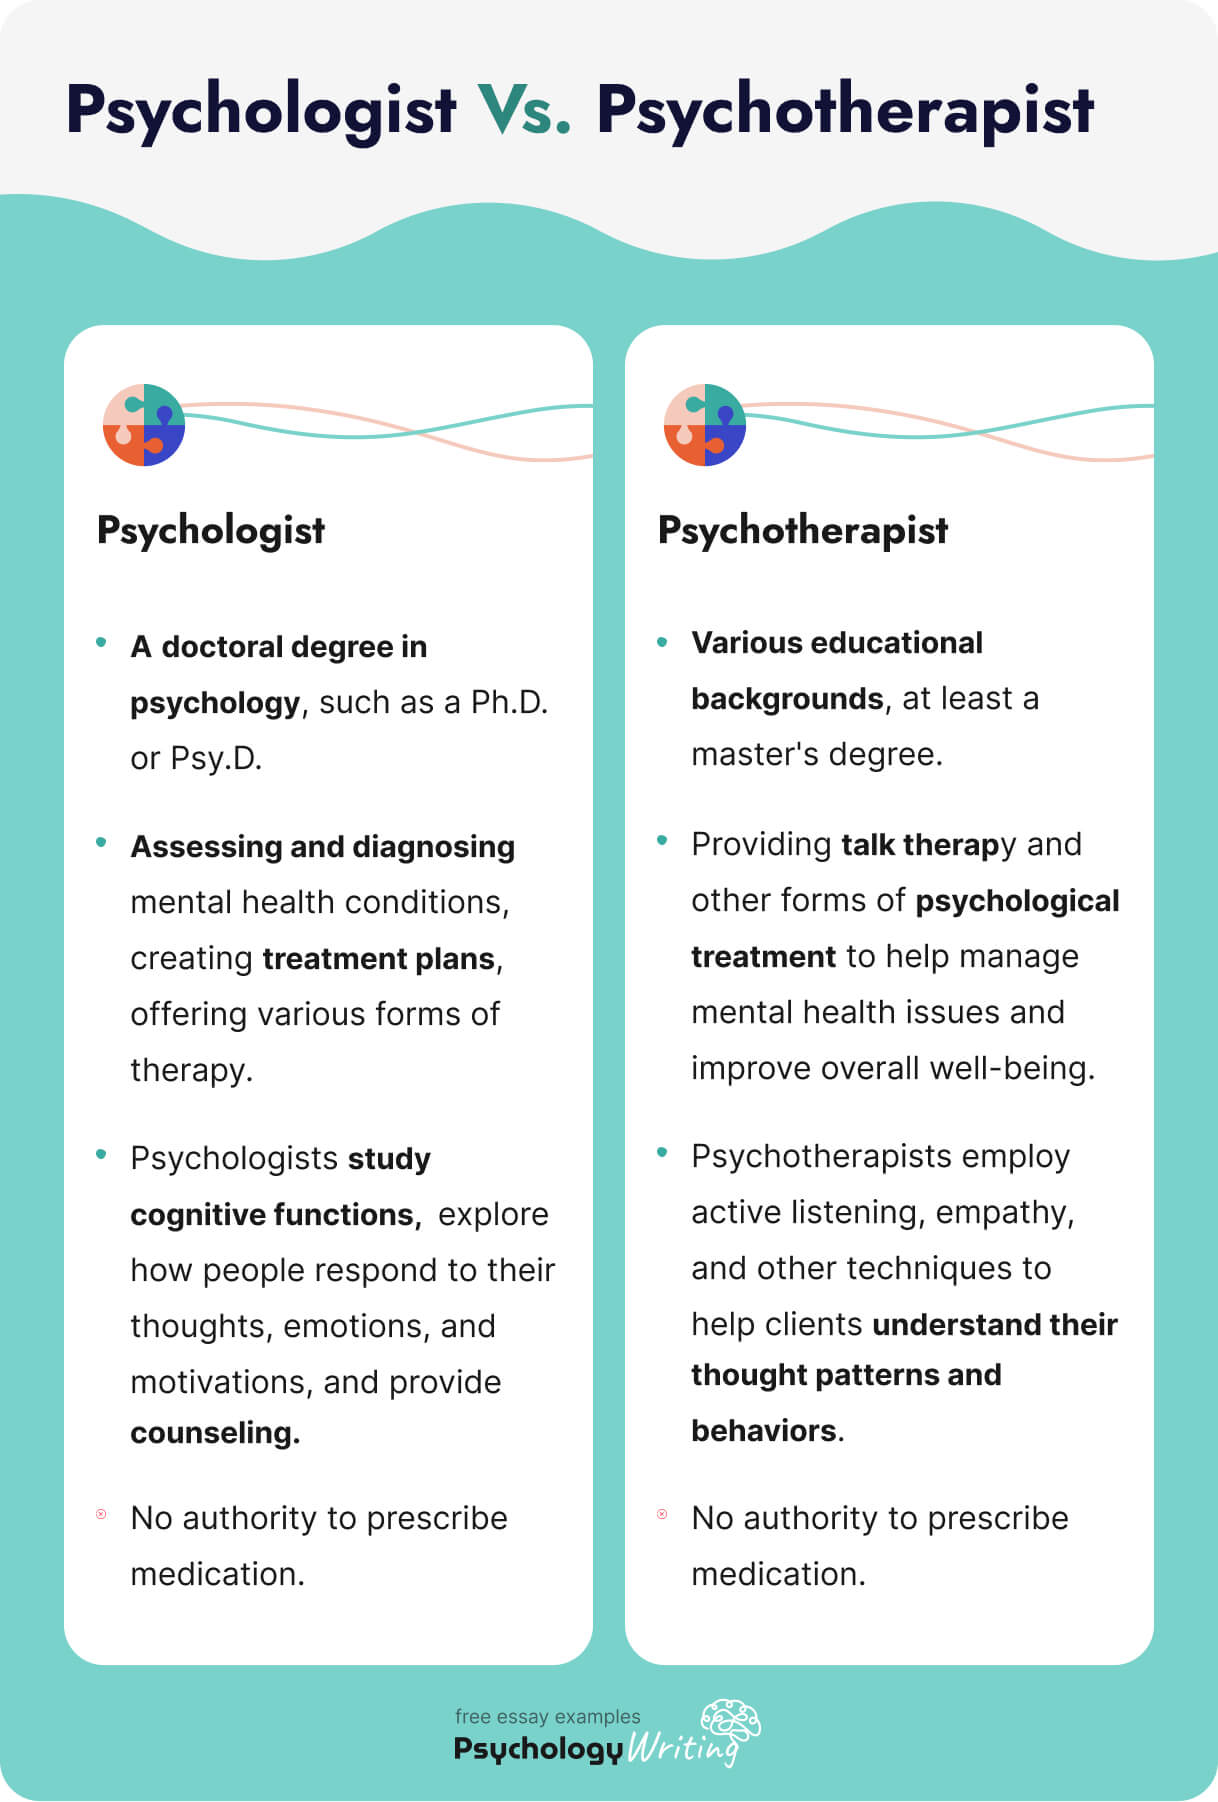 The picture provides a simple comparison of a psychologist and a psychotherapist.